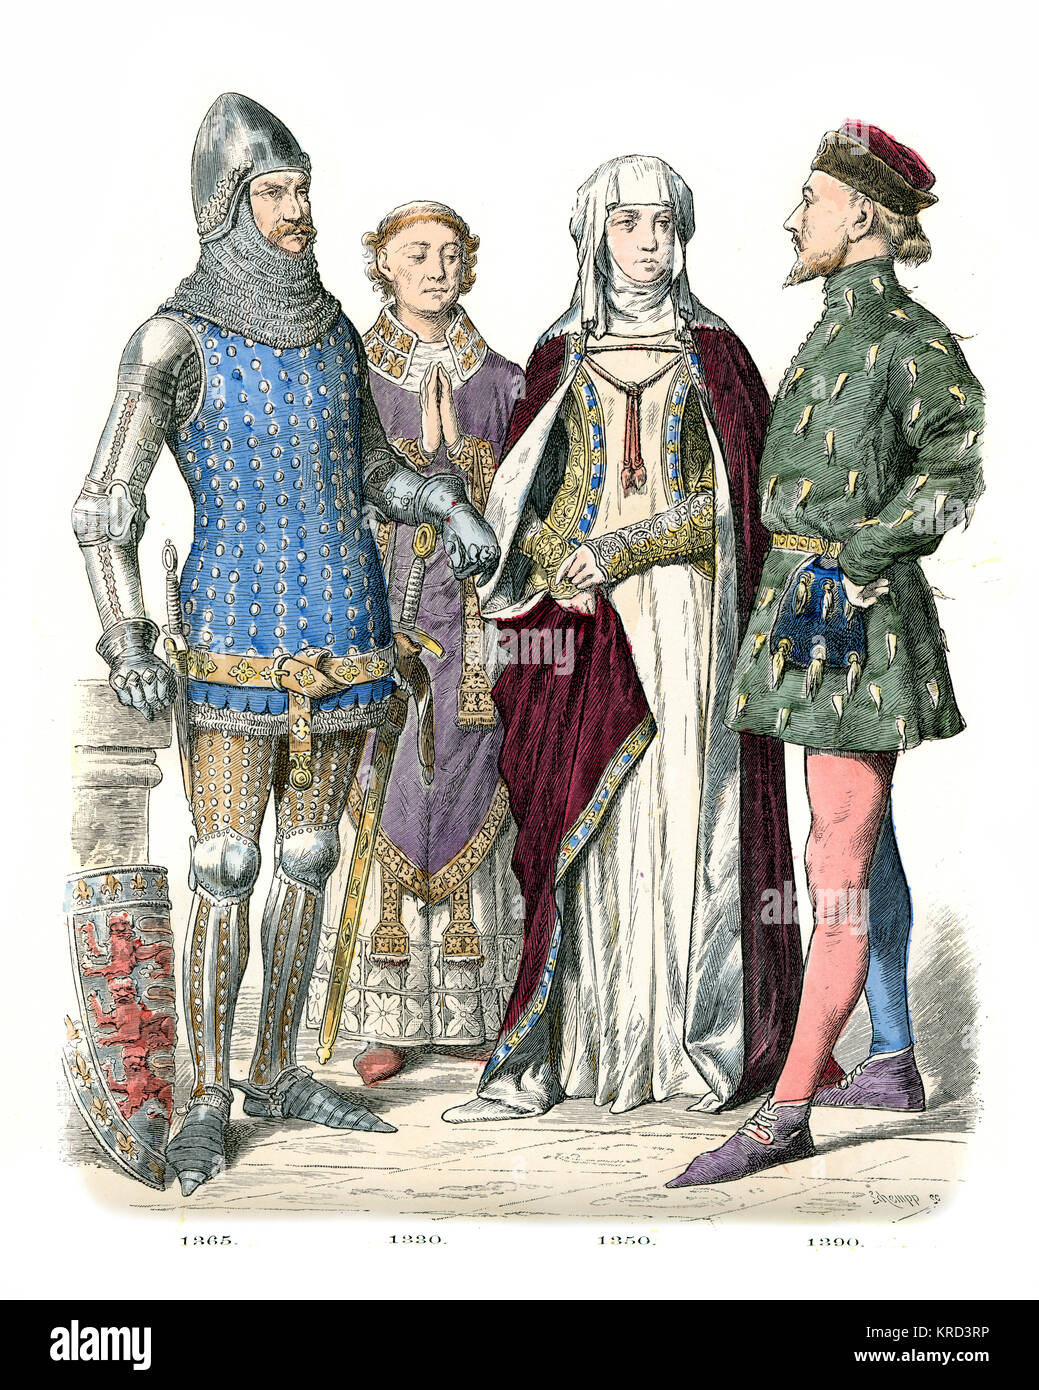 Vintage engraving of English Medieval fashions of noble people, 14th Century. Knight in armour, priest, Lady and Courtier Stock Photo